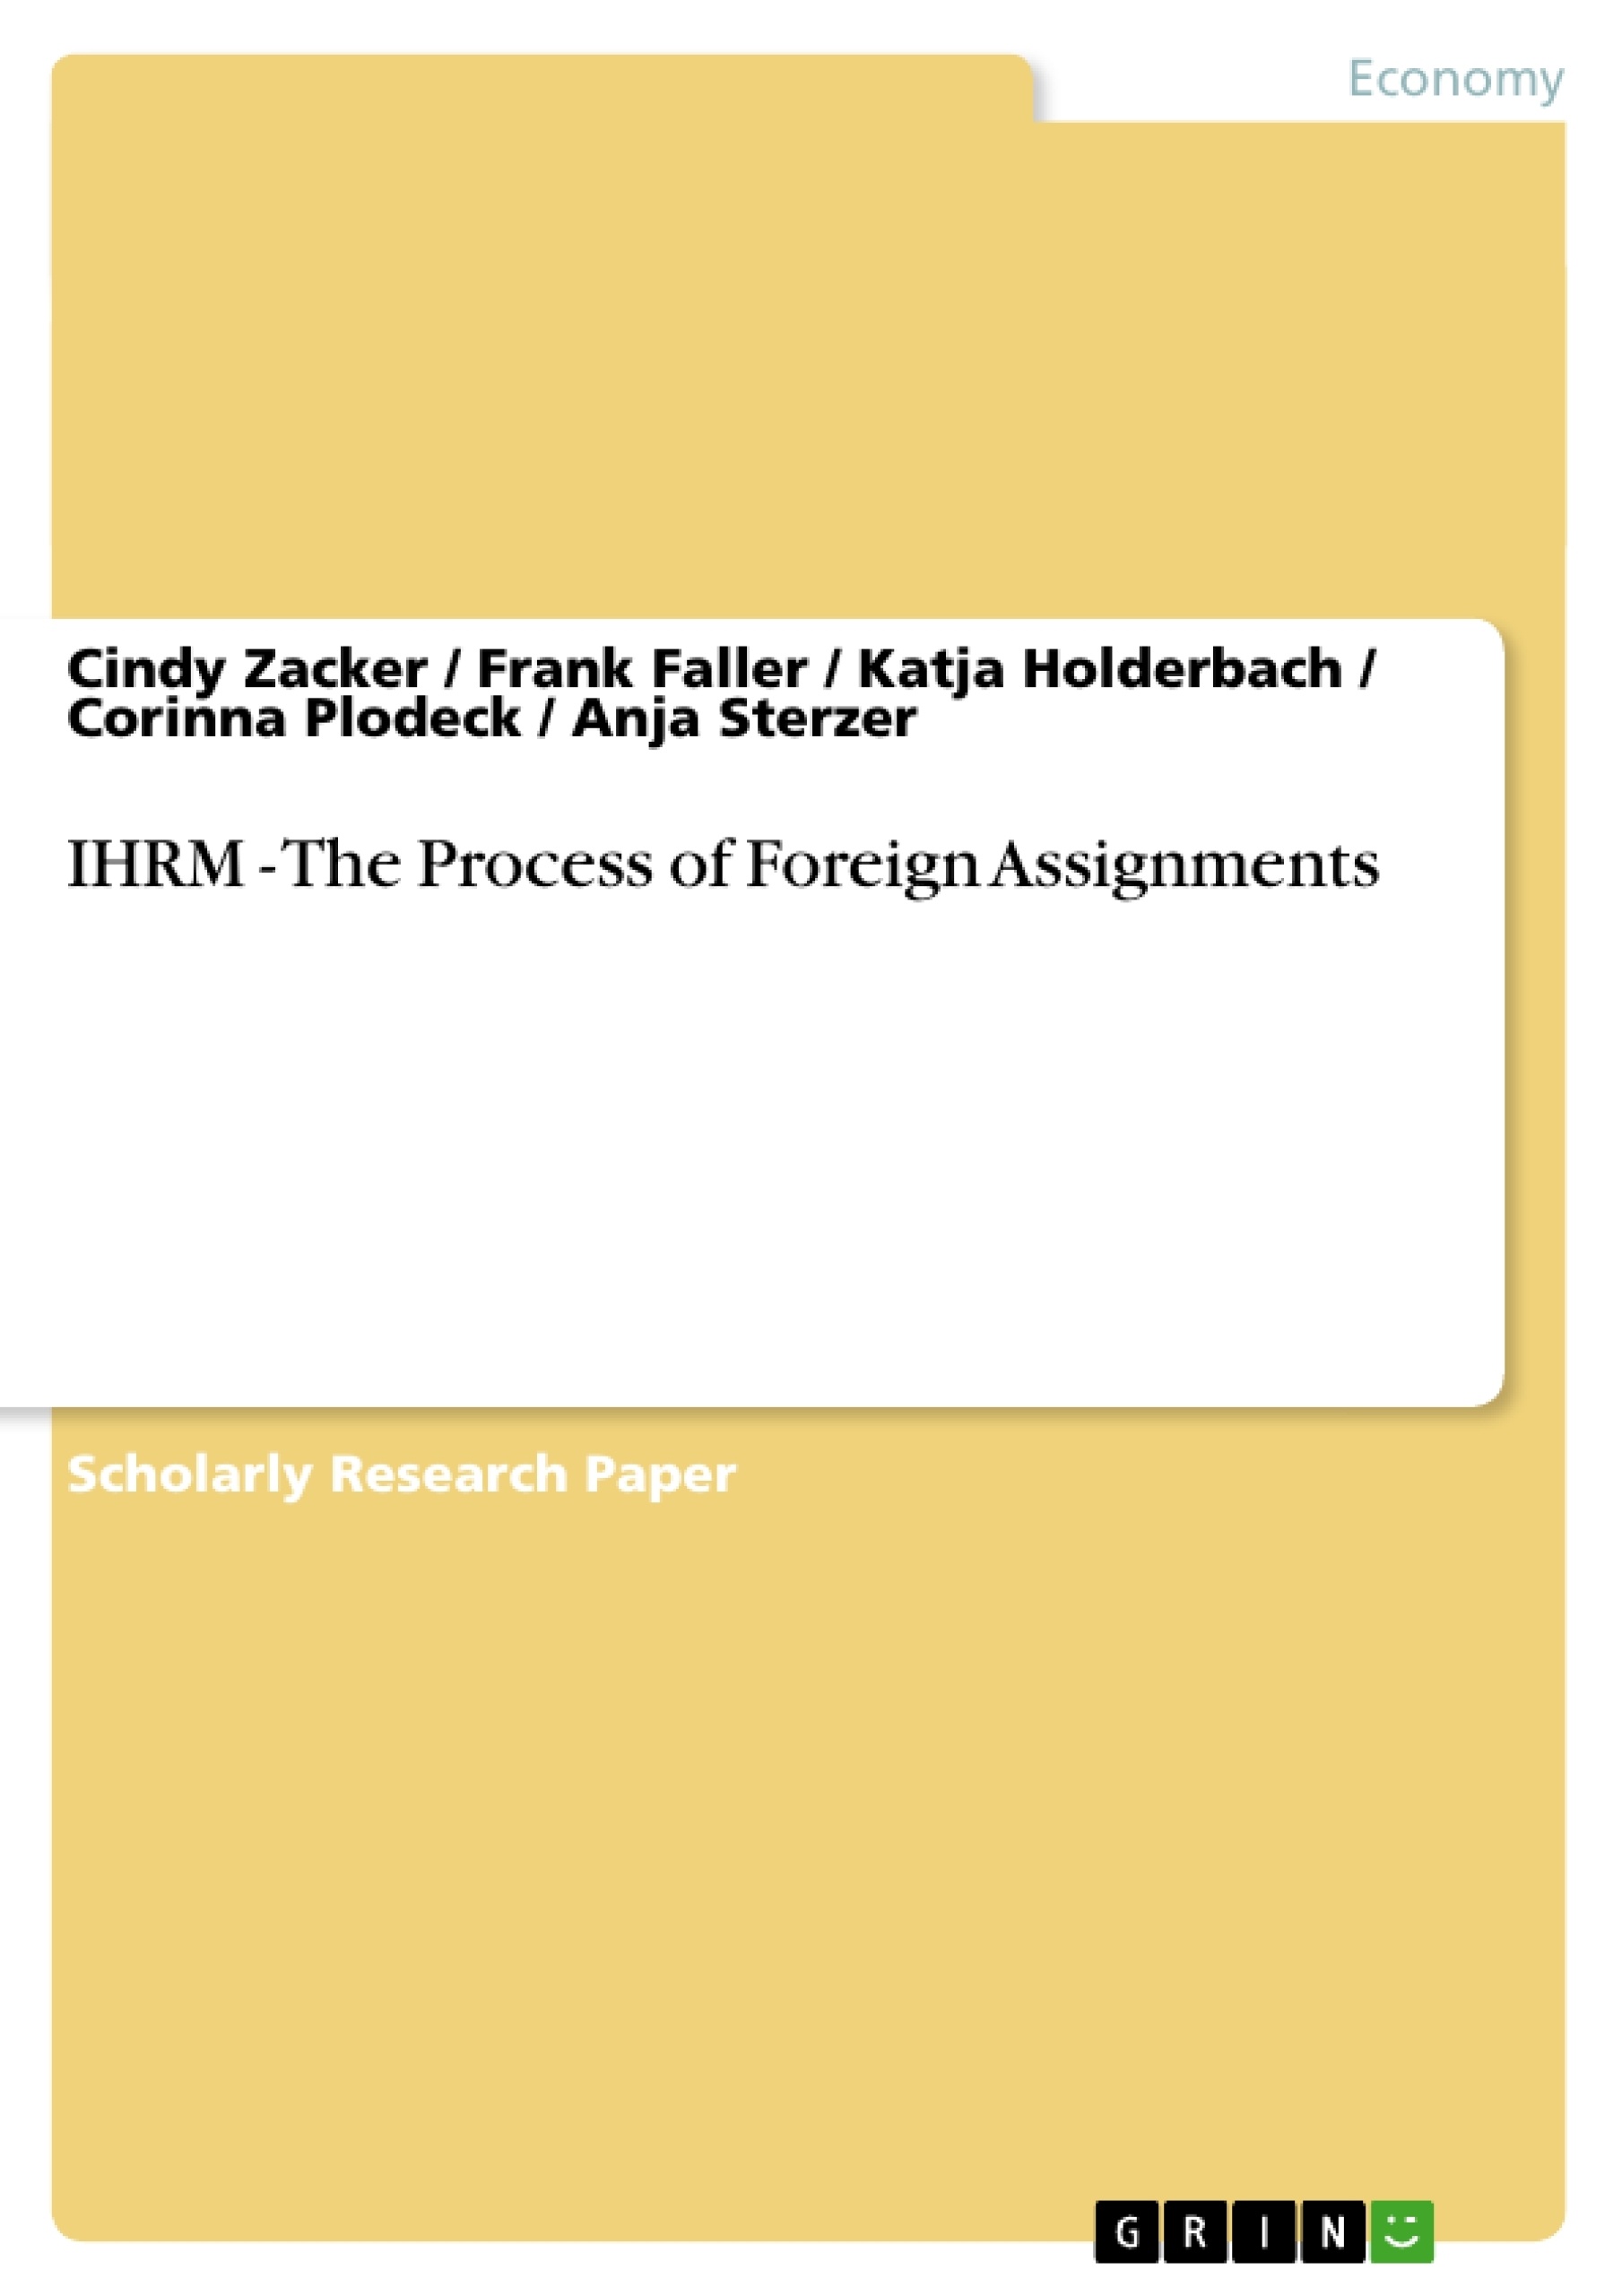 Título: IHRM - The Process of Foreign Assignments